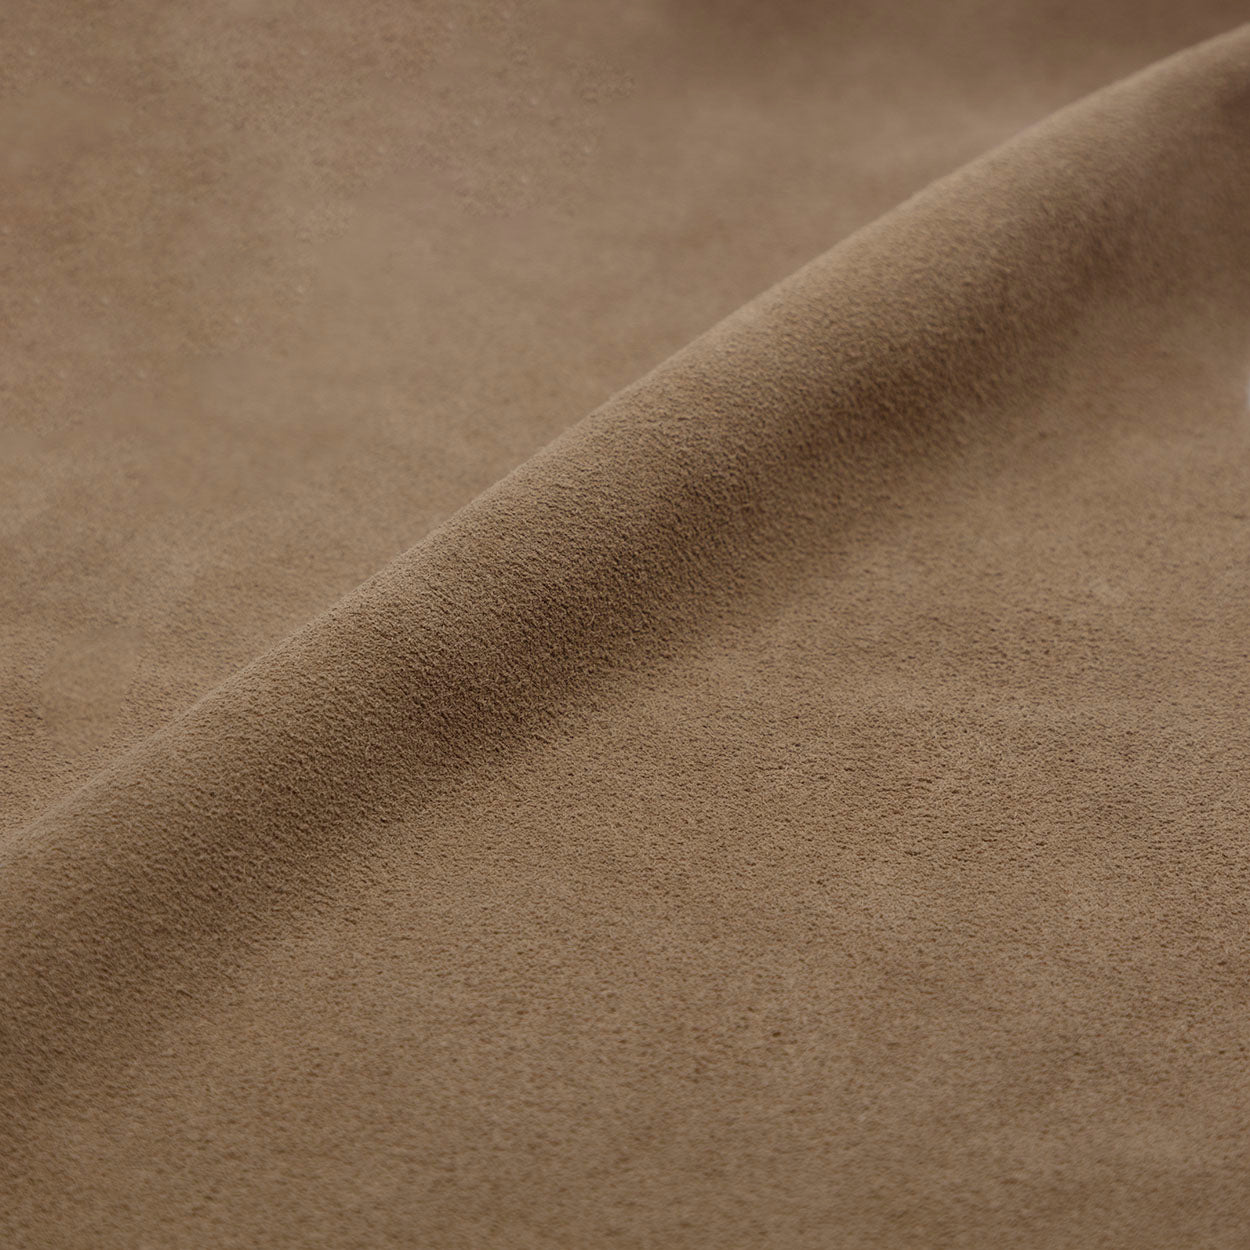 Suede Light Tan Leather Swatch